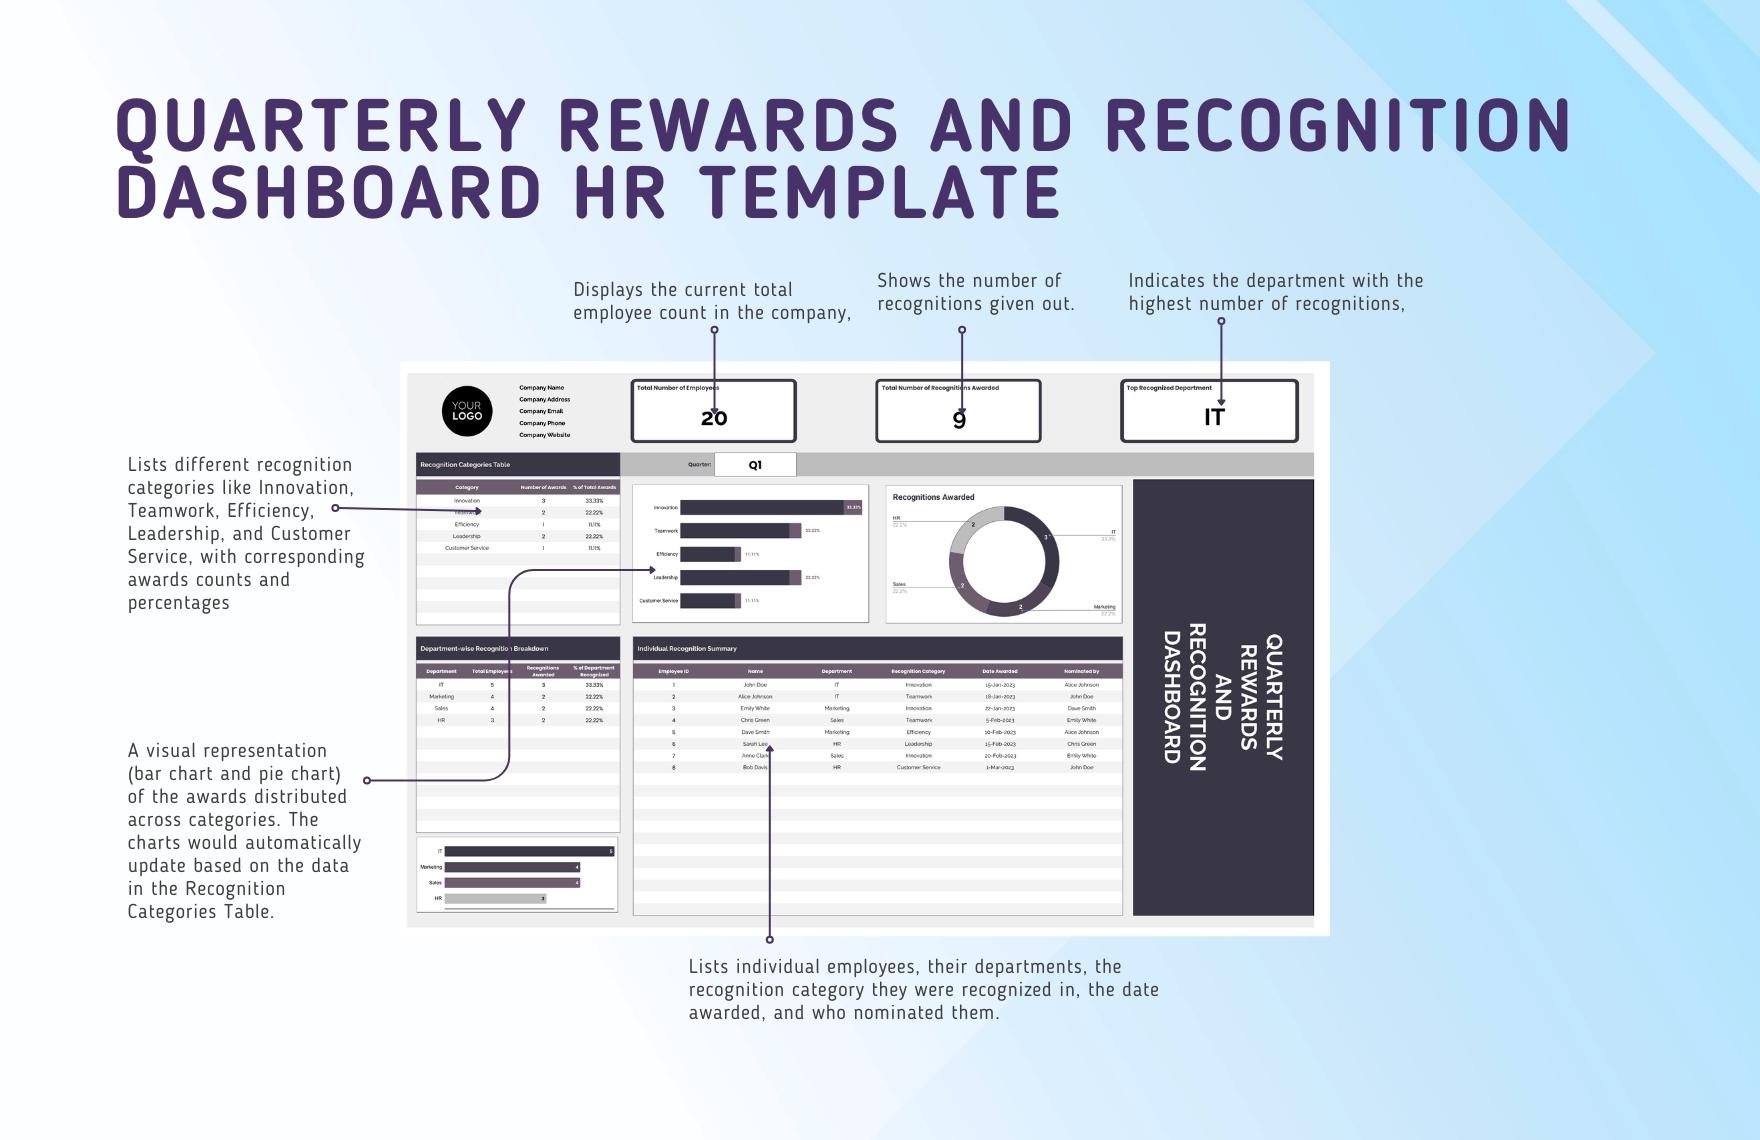 Quarterly Rewards and Recognition Dashboard HR Template